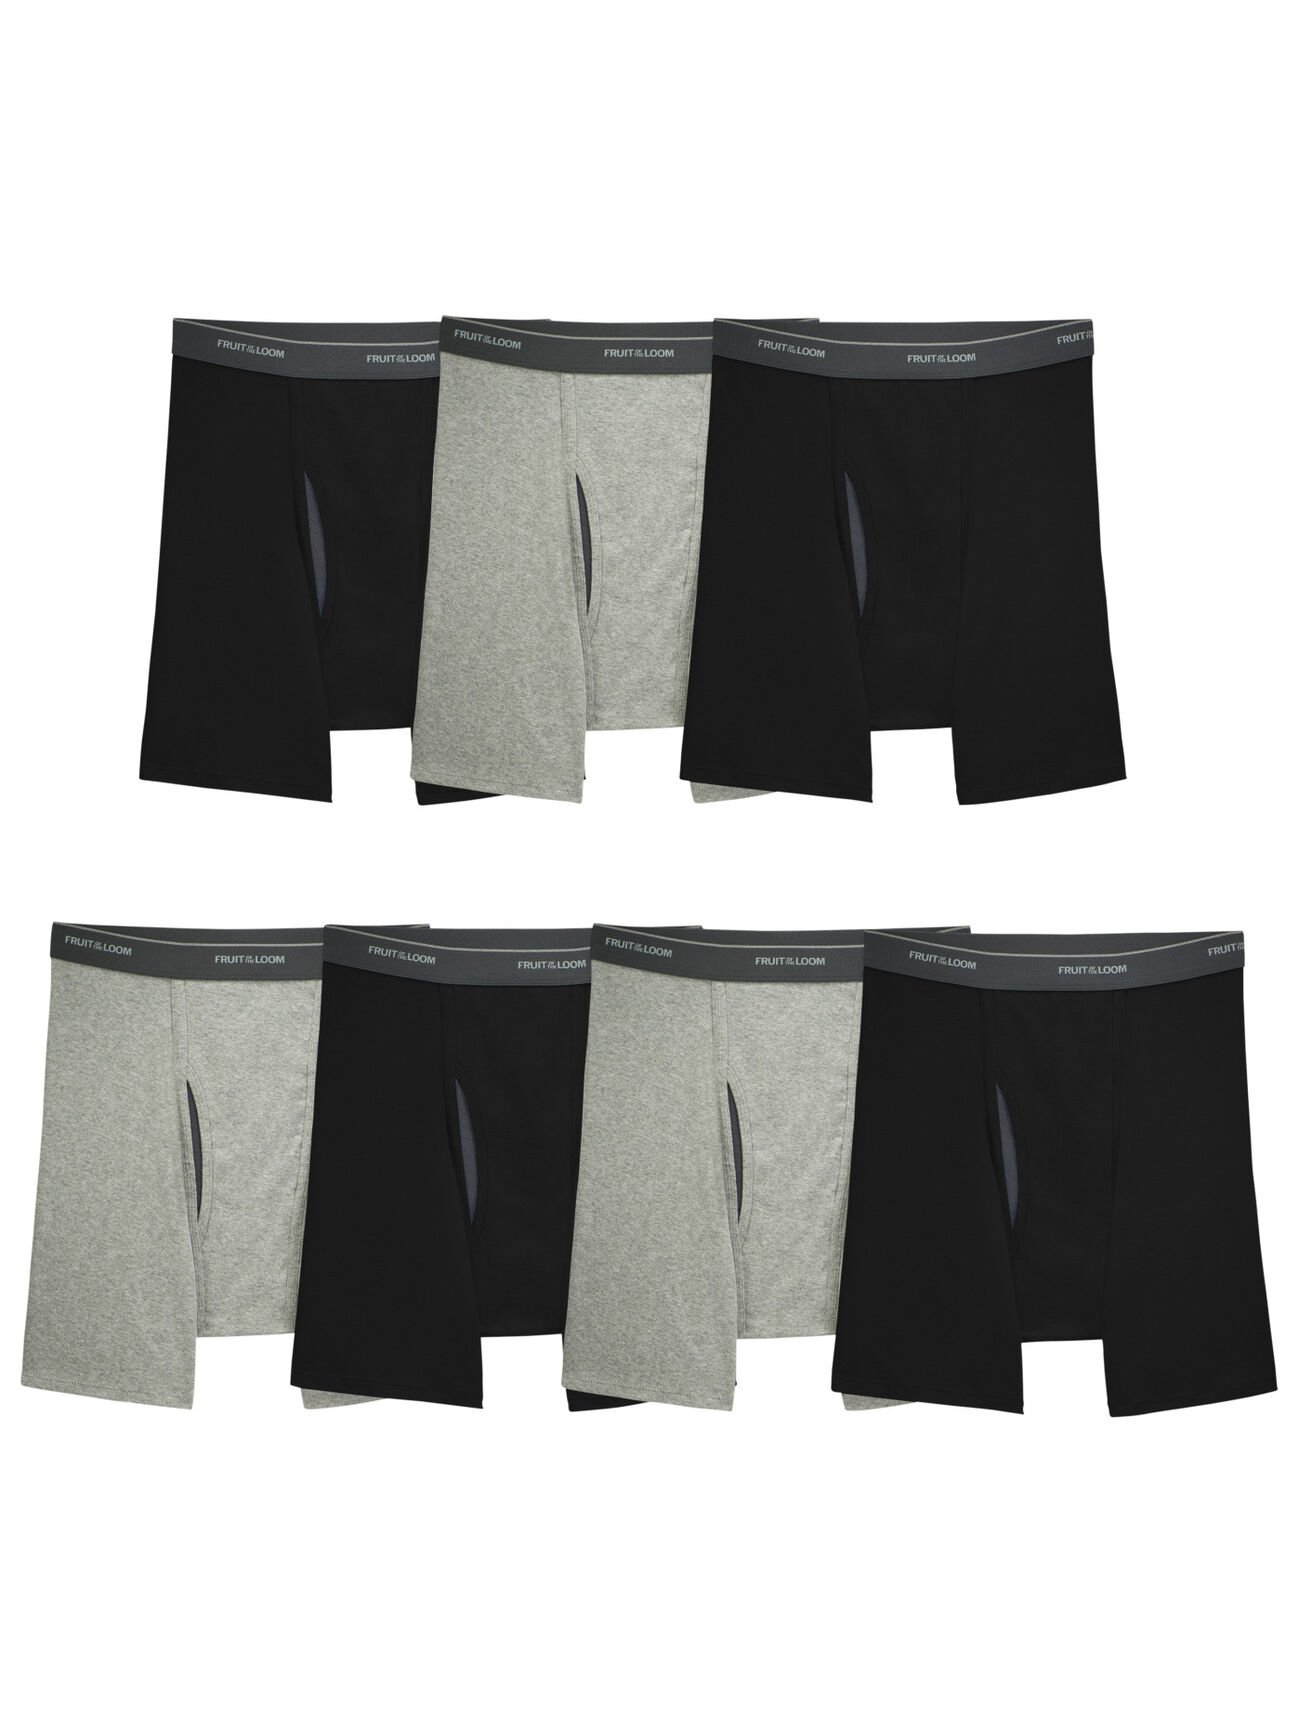 Men'sEversoft®  CoolZone® Fly Boxer Briefs, Black and Gray 7 Pack Assorted